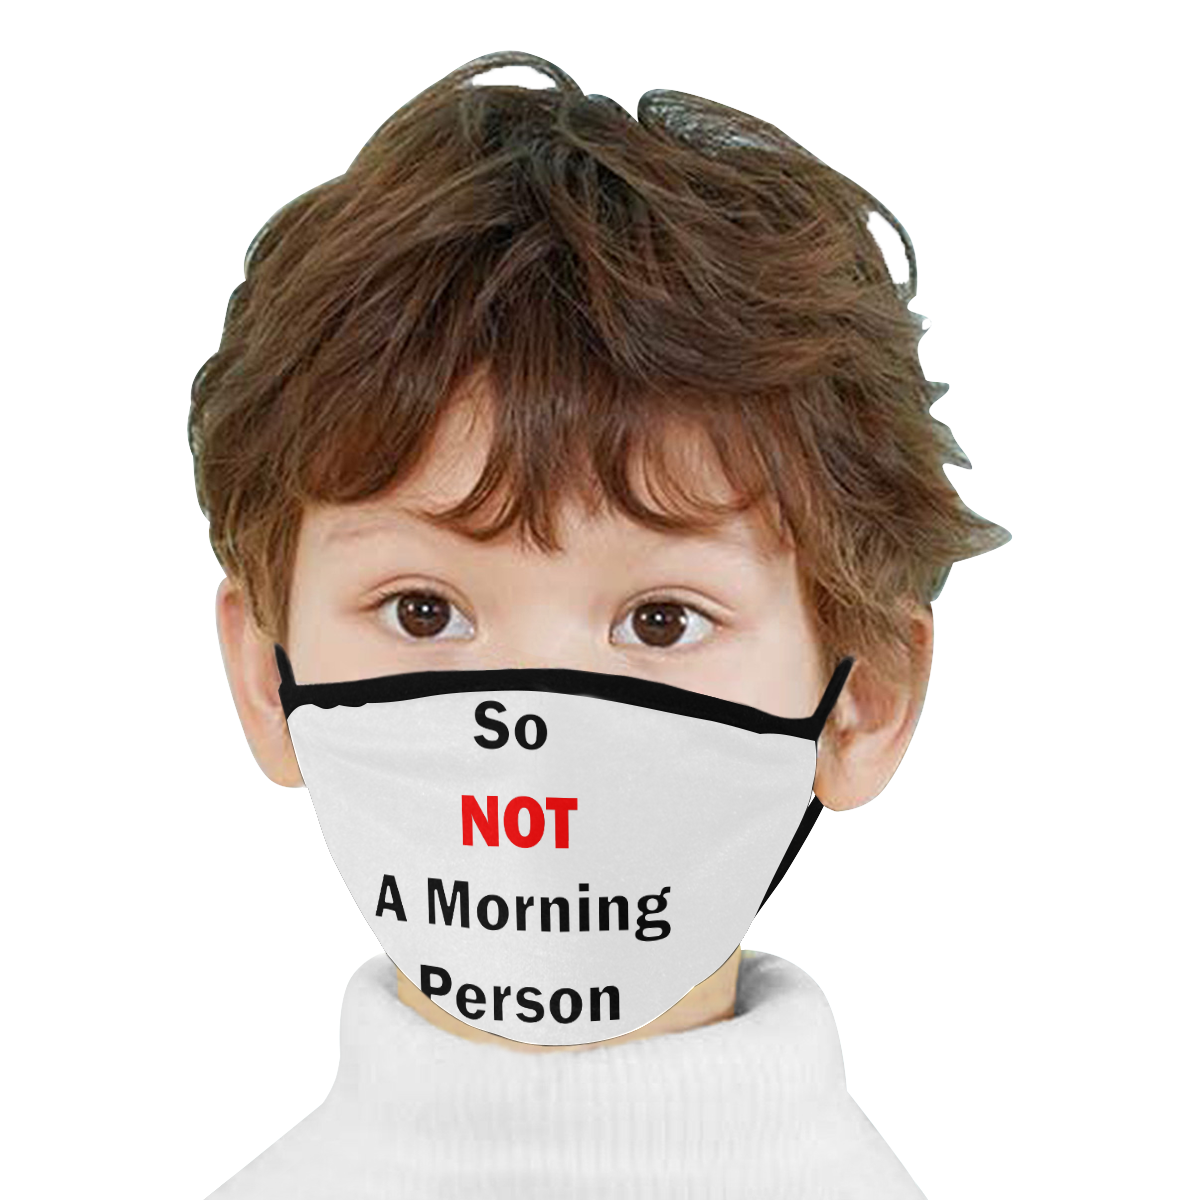 So Not A Morning Person Mouth Mask